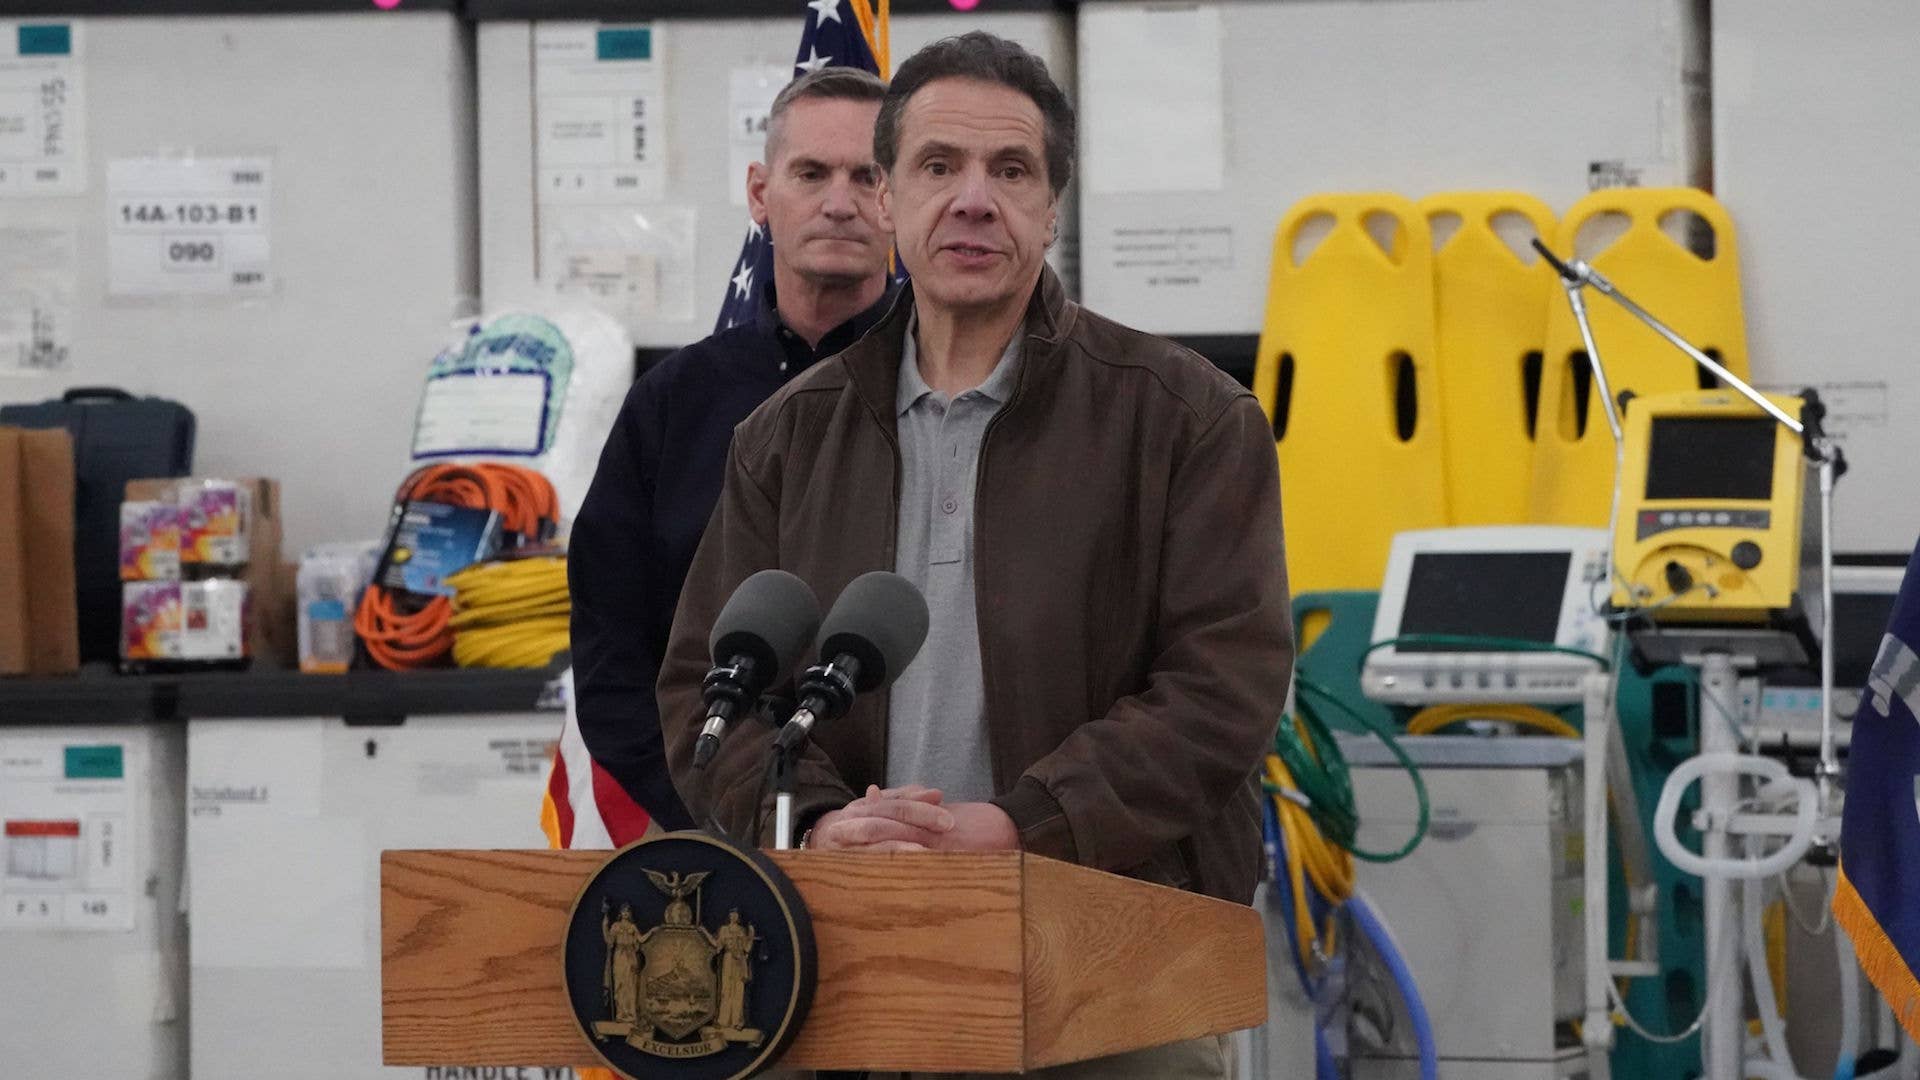 Andrew Cuomo announces plans to convert the Jacob Javits Center into a field hospital.